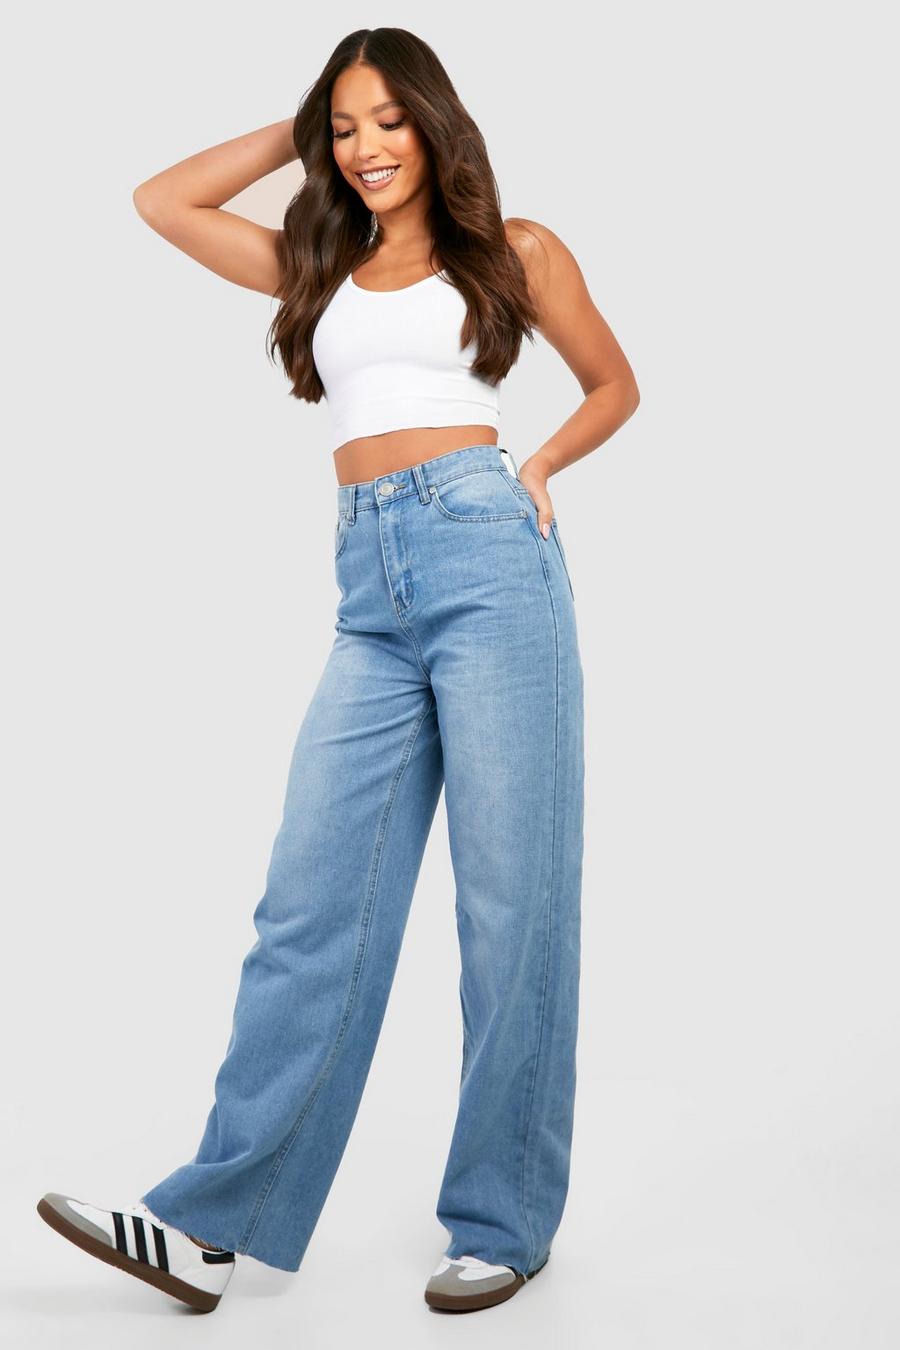 Jeans For Tall Women, Tall Jeans